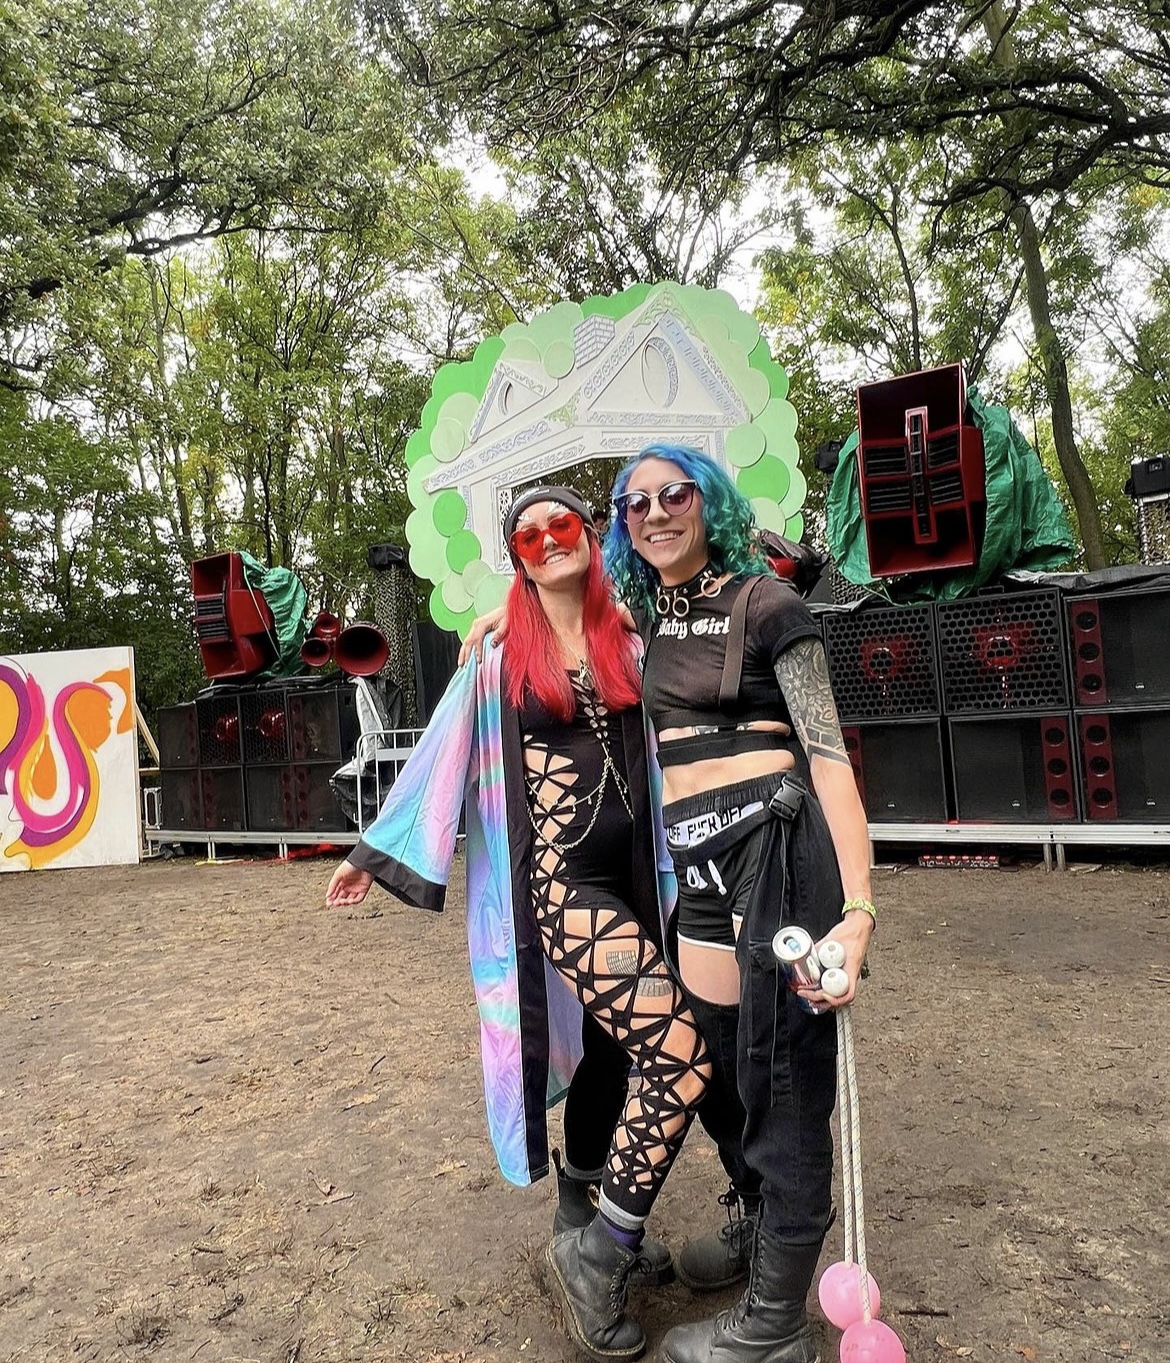 Two women, one with red hair and one with blue hari, posing for a photo in front of large speakers in the woods